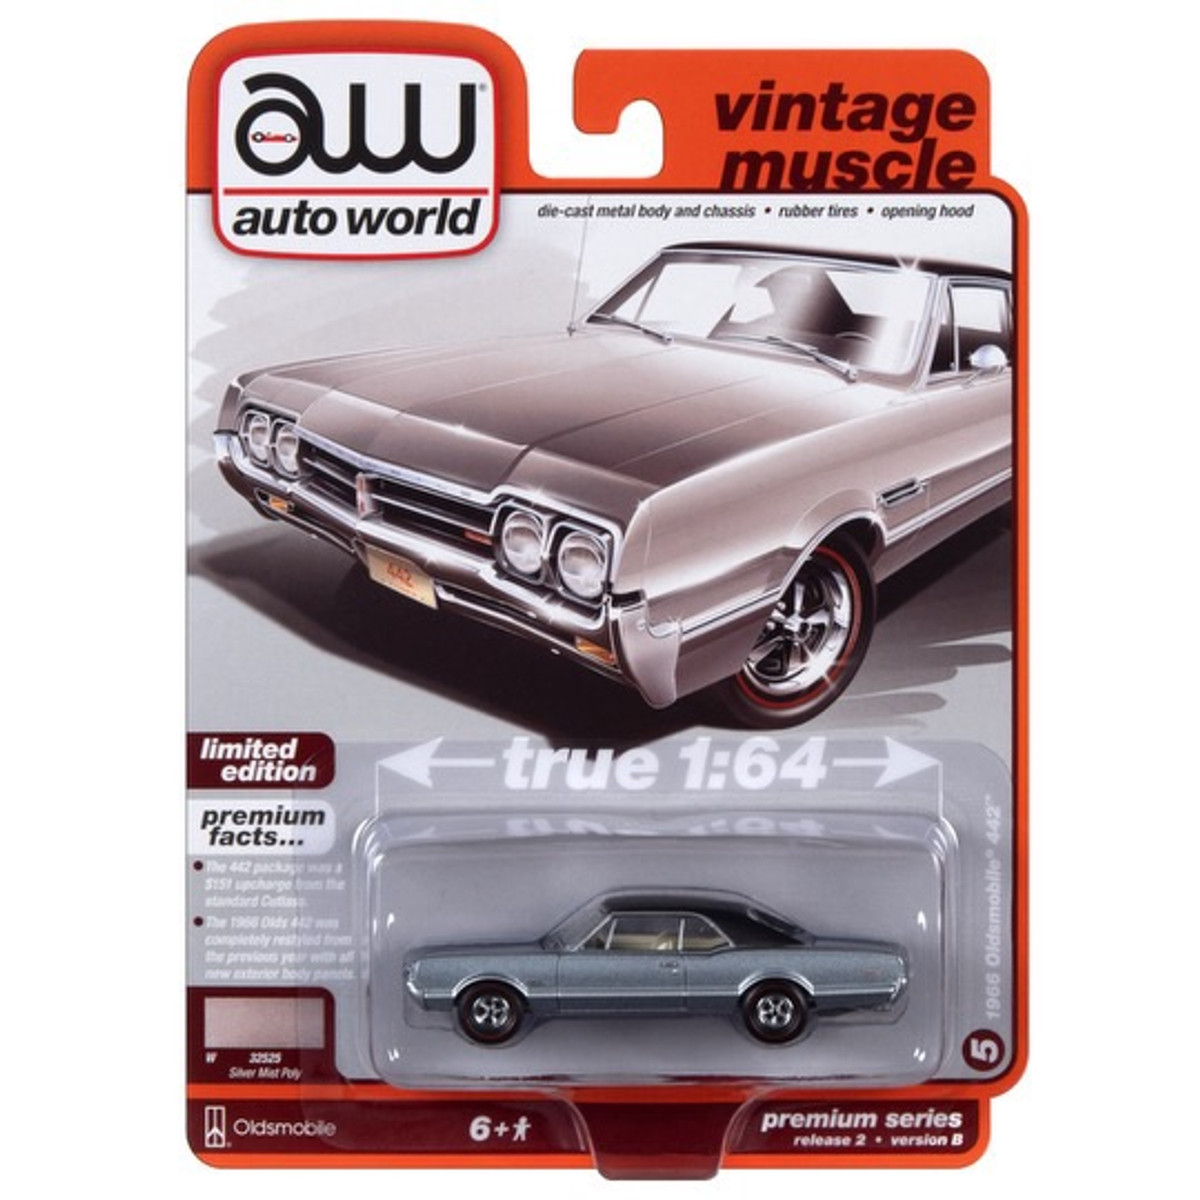 2023 Auto World Vintage Muscle 1966 Oldsmobile 442 Release 2 Version B